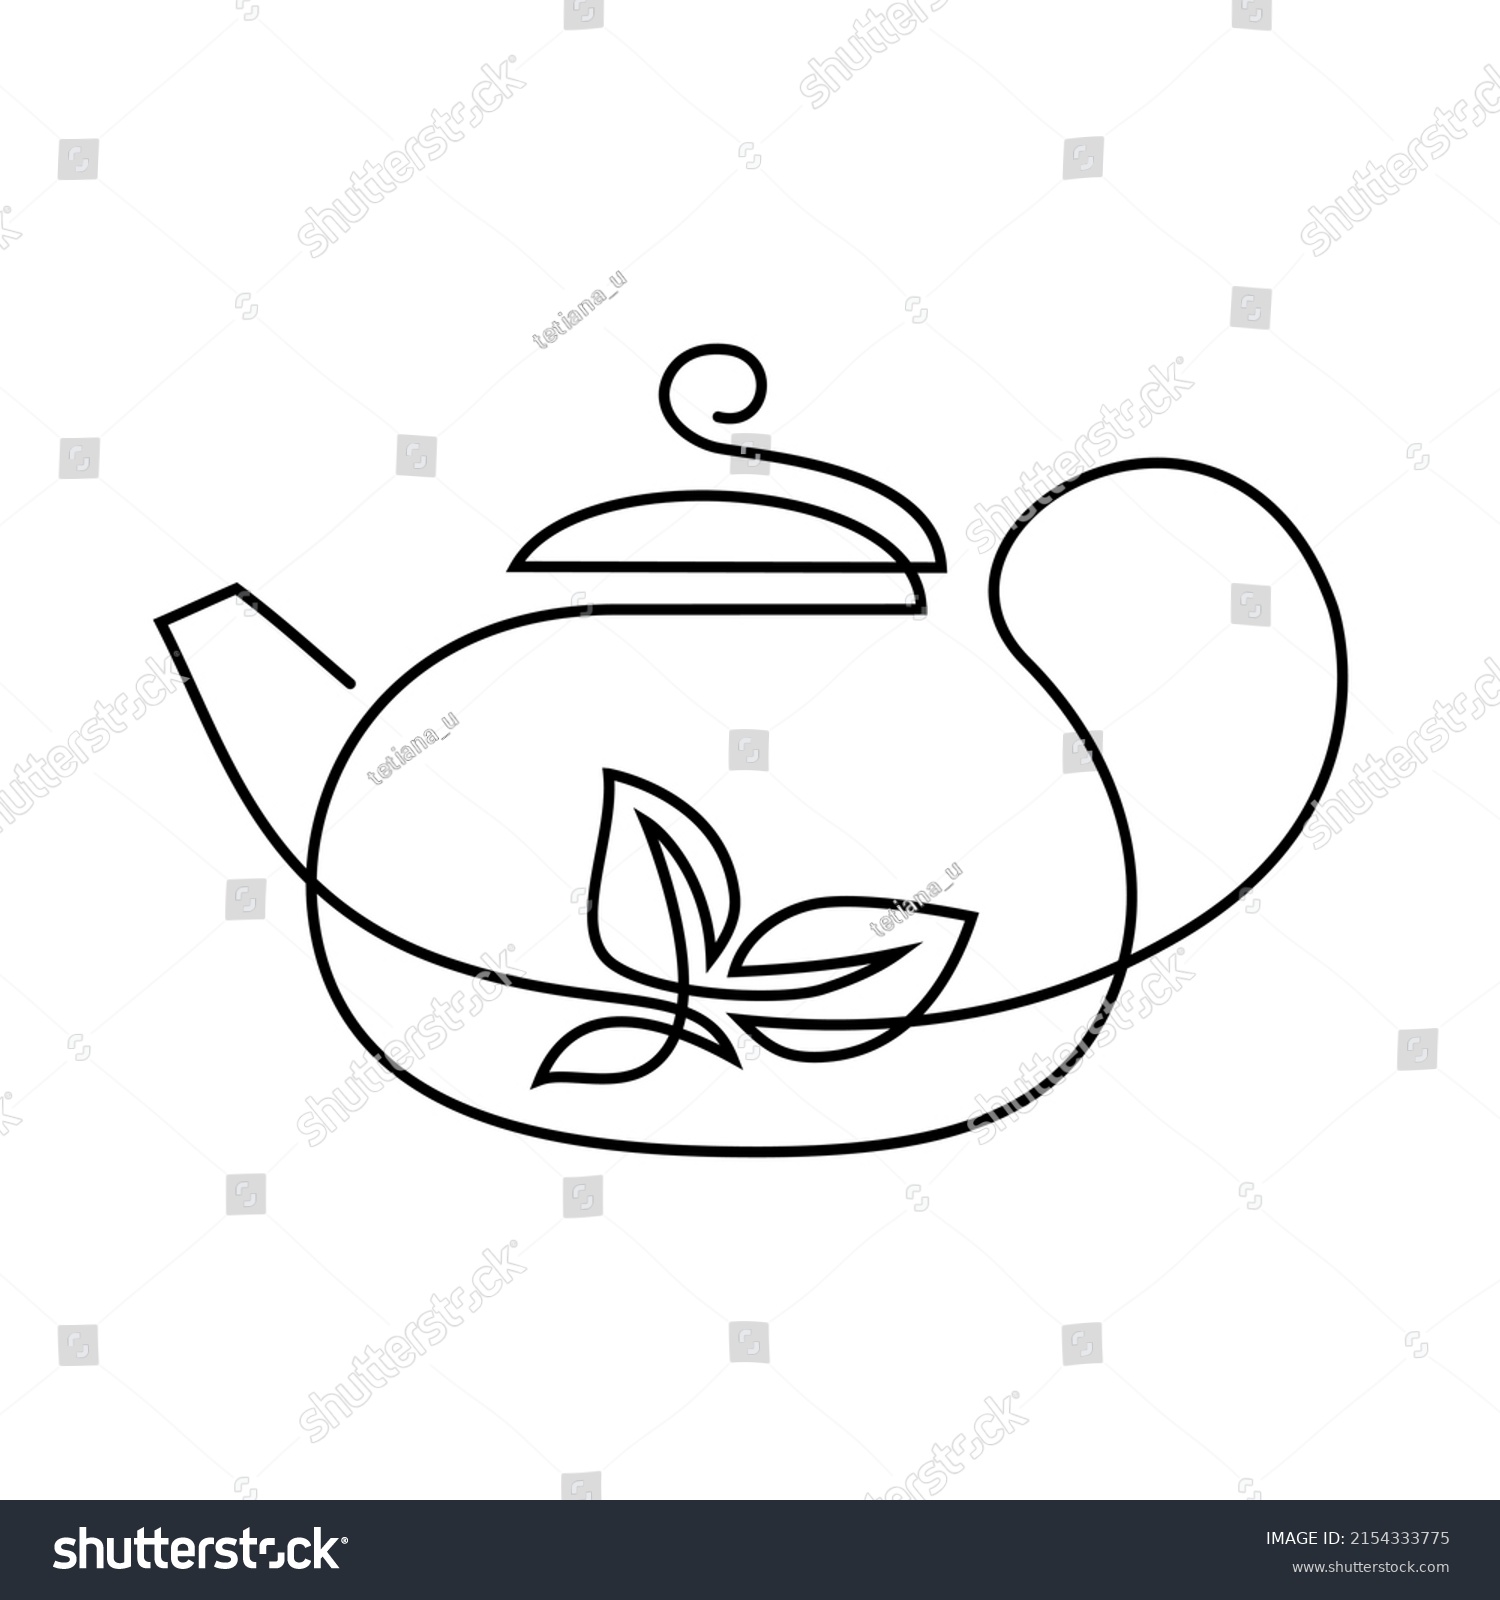 Teapot in continuous line art drawing style. Herbal tea black linear design isolated on white background. Vector illustration #2154333775